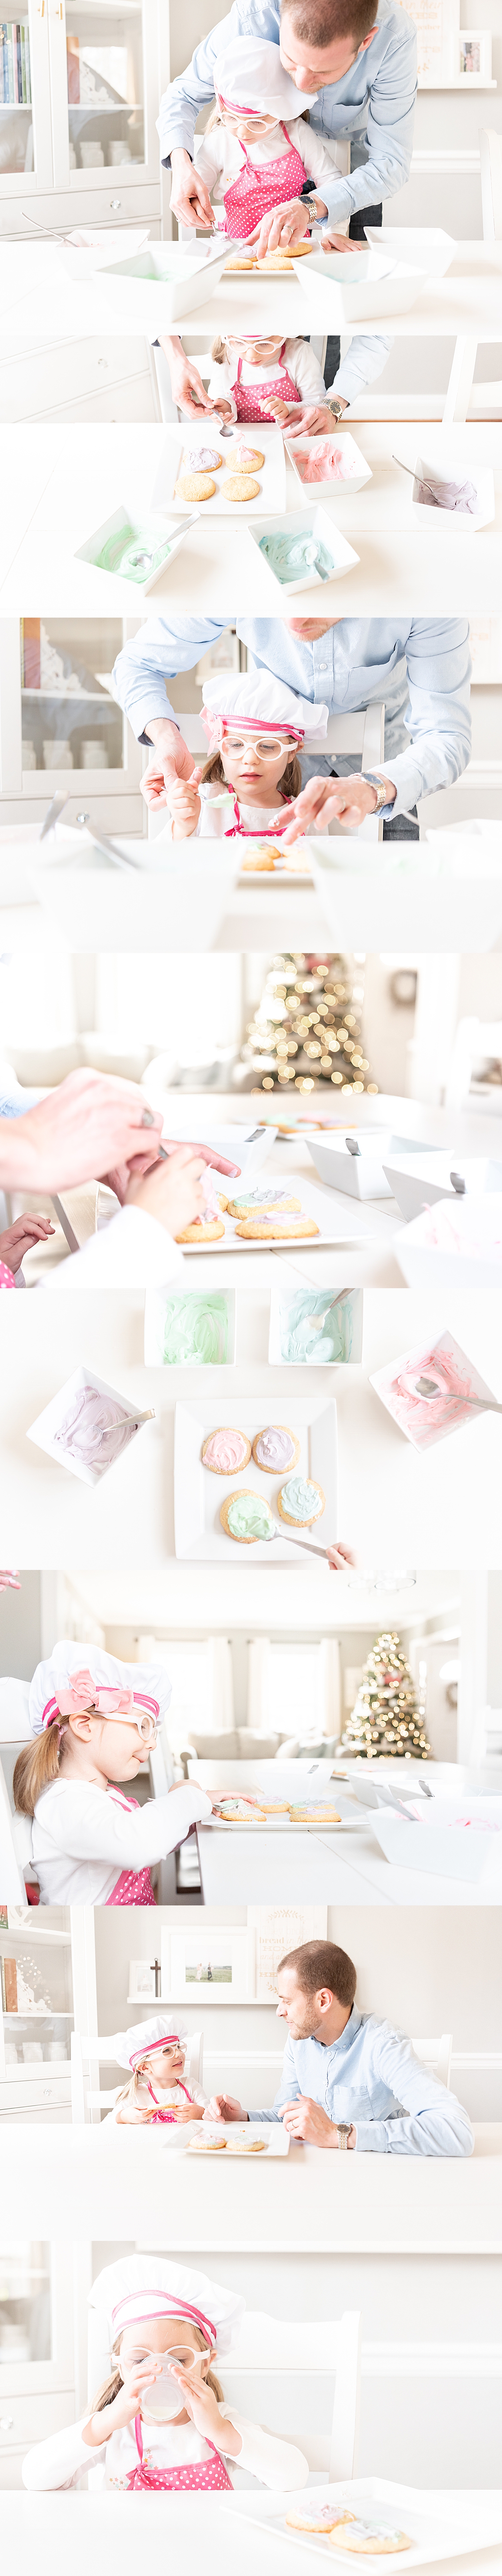 Cookies For Santa + A Little Nibble | Bethadilly Photography | www.bethadilly.com